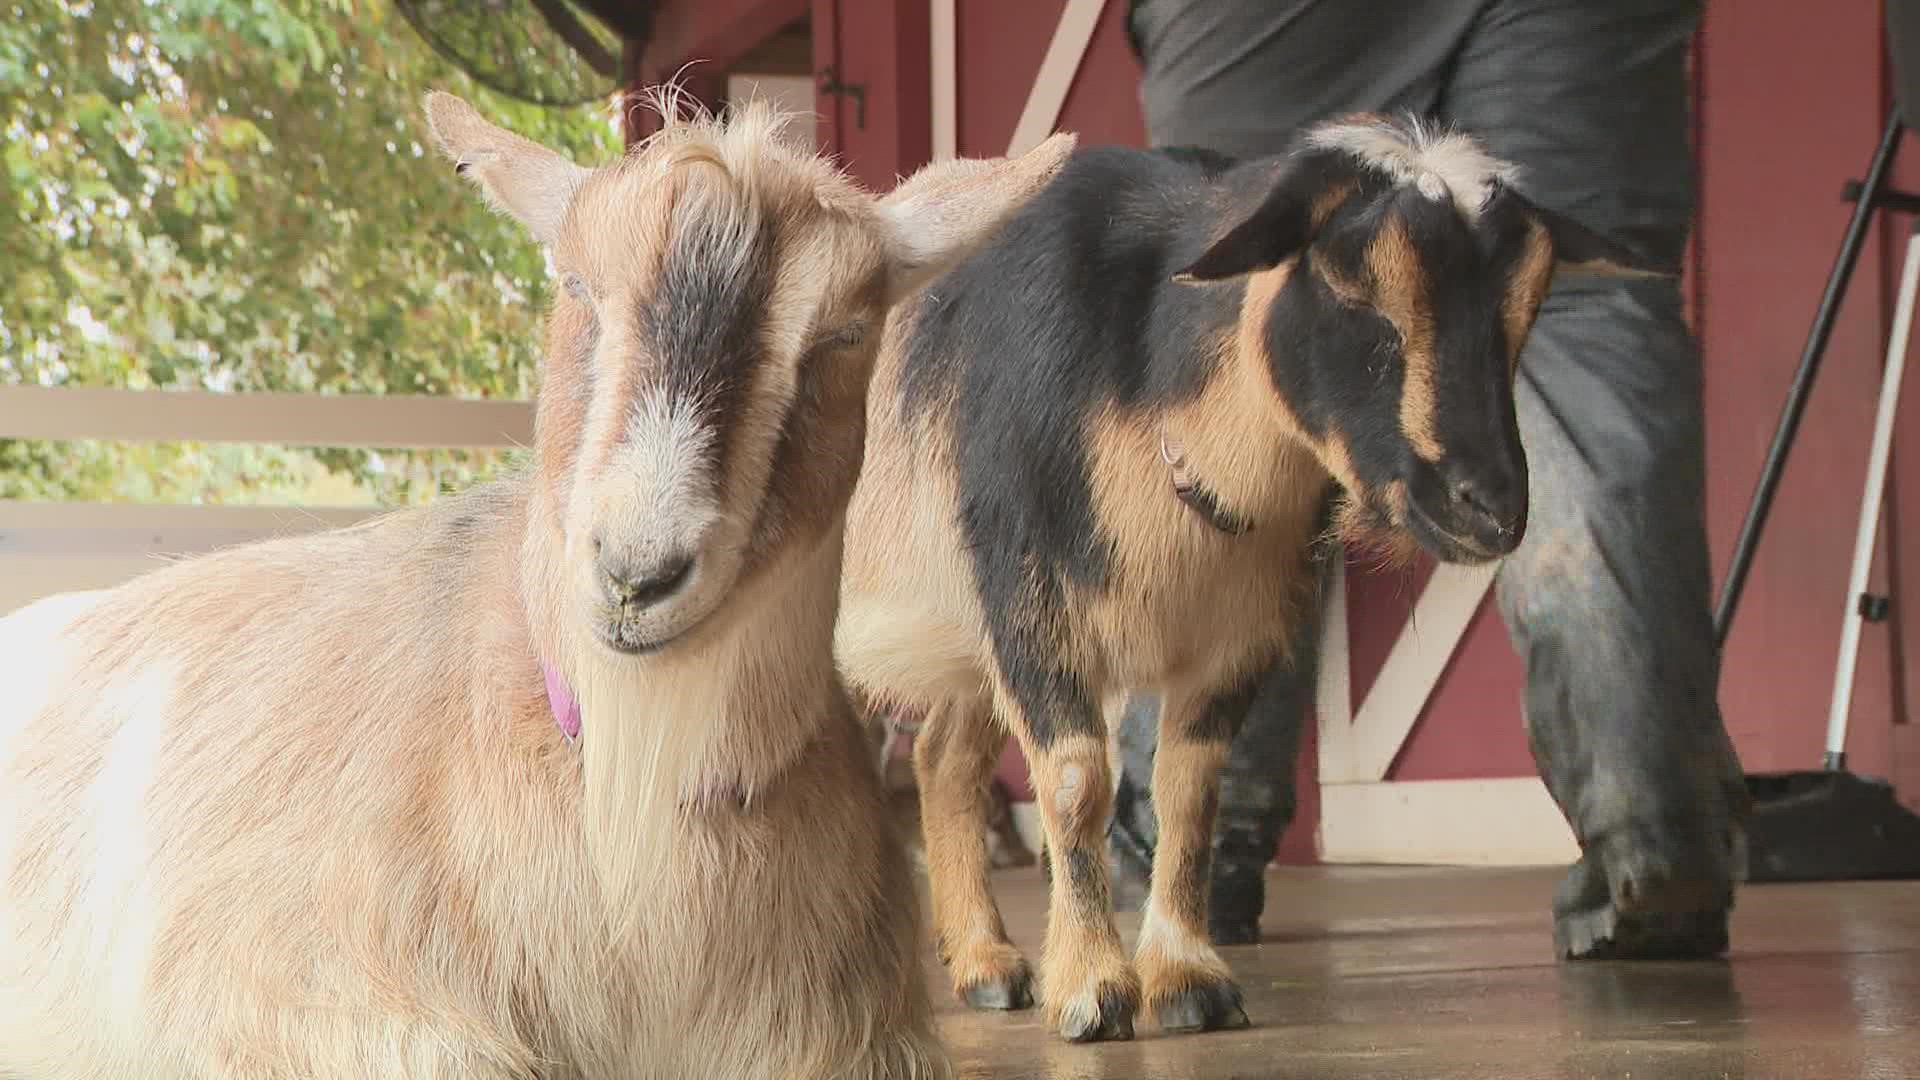 12News shares how one zookeeper is caring for a range of animals in the wet weather.